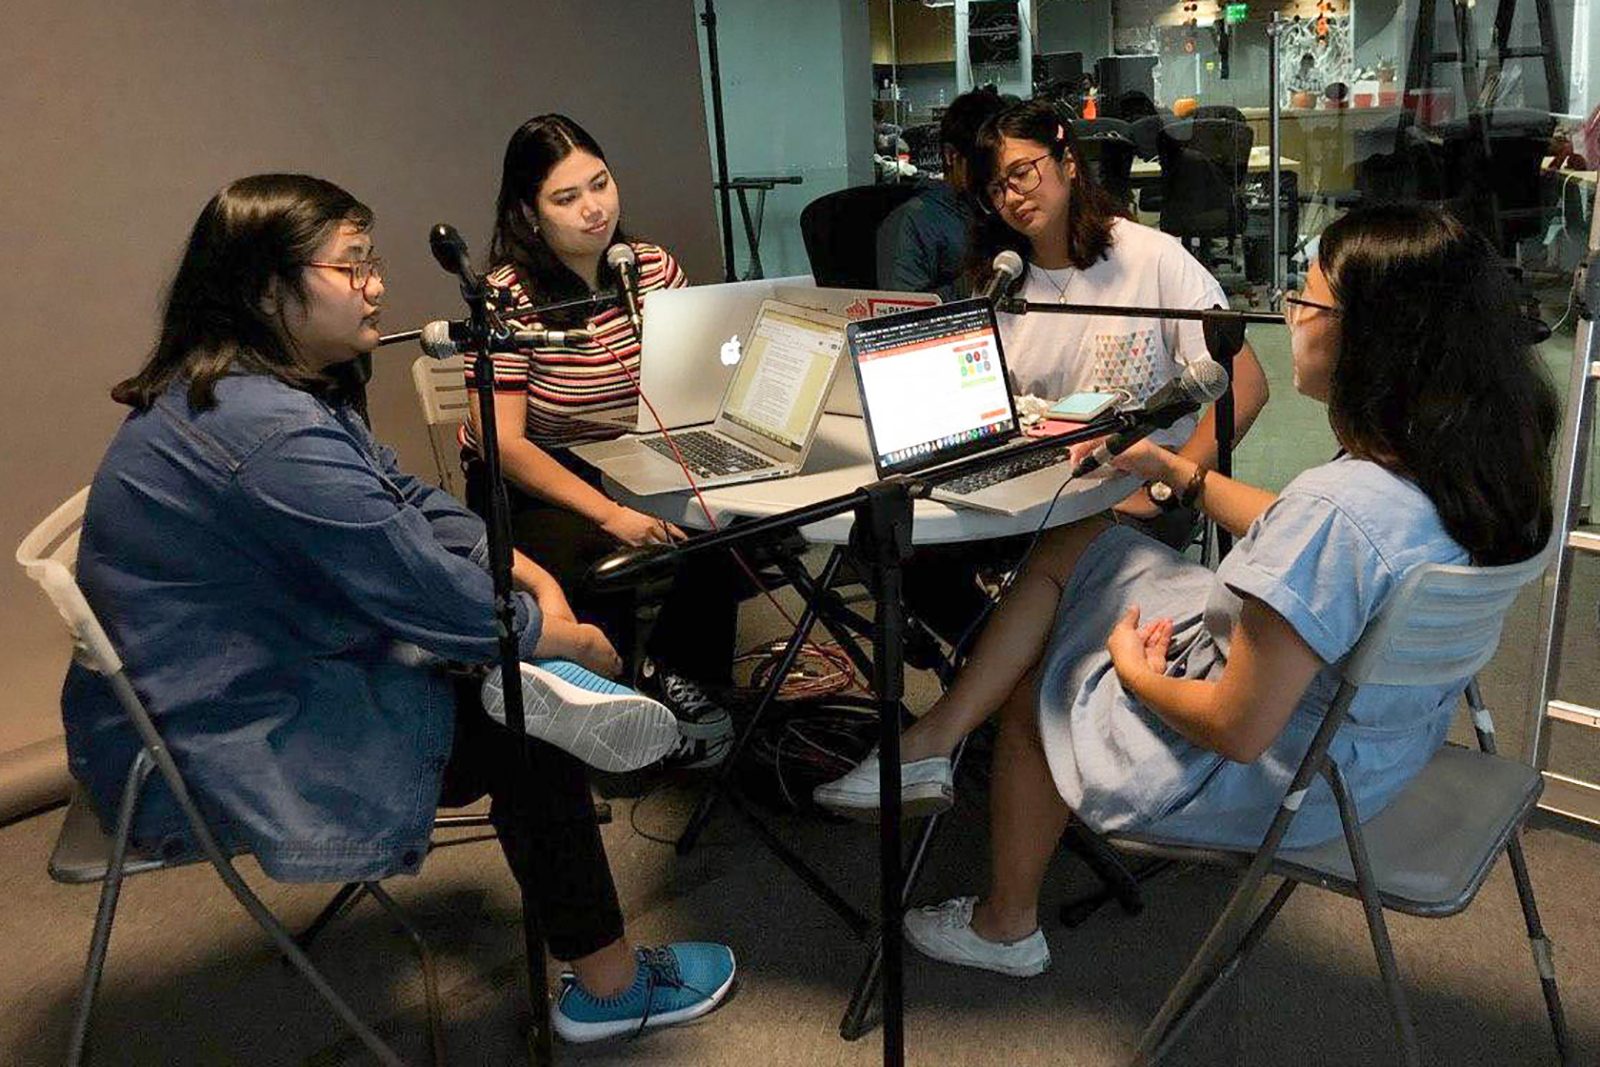 PODCAST. Rappler reporters take turns in churning out regular podcasts. In this photo (clockwise from left) are Jodesz Gavilan, Sofia Tomacruz, Lian Buan, and Mara Cepeda. Photo by Charles Salazar/Rappler 